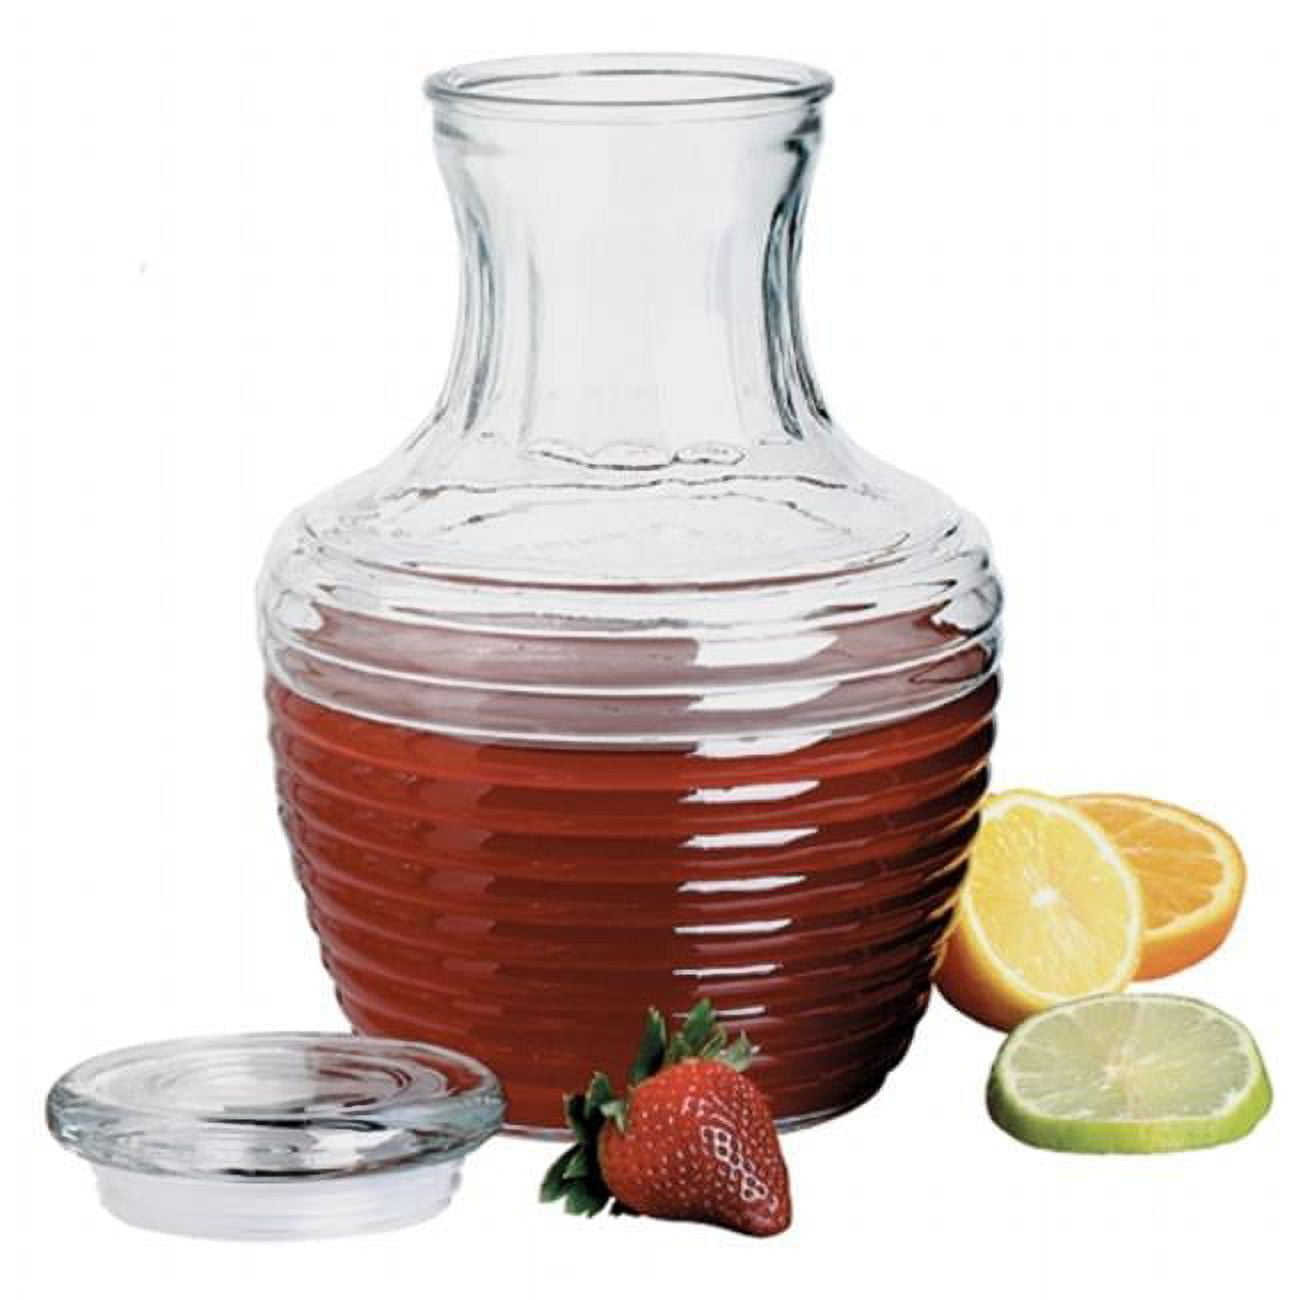 Anchor Hocking Carafe with Lid - Shop Pitchers & Dispensers at H-E-B